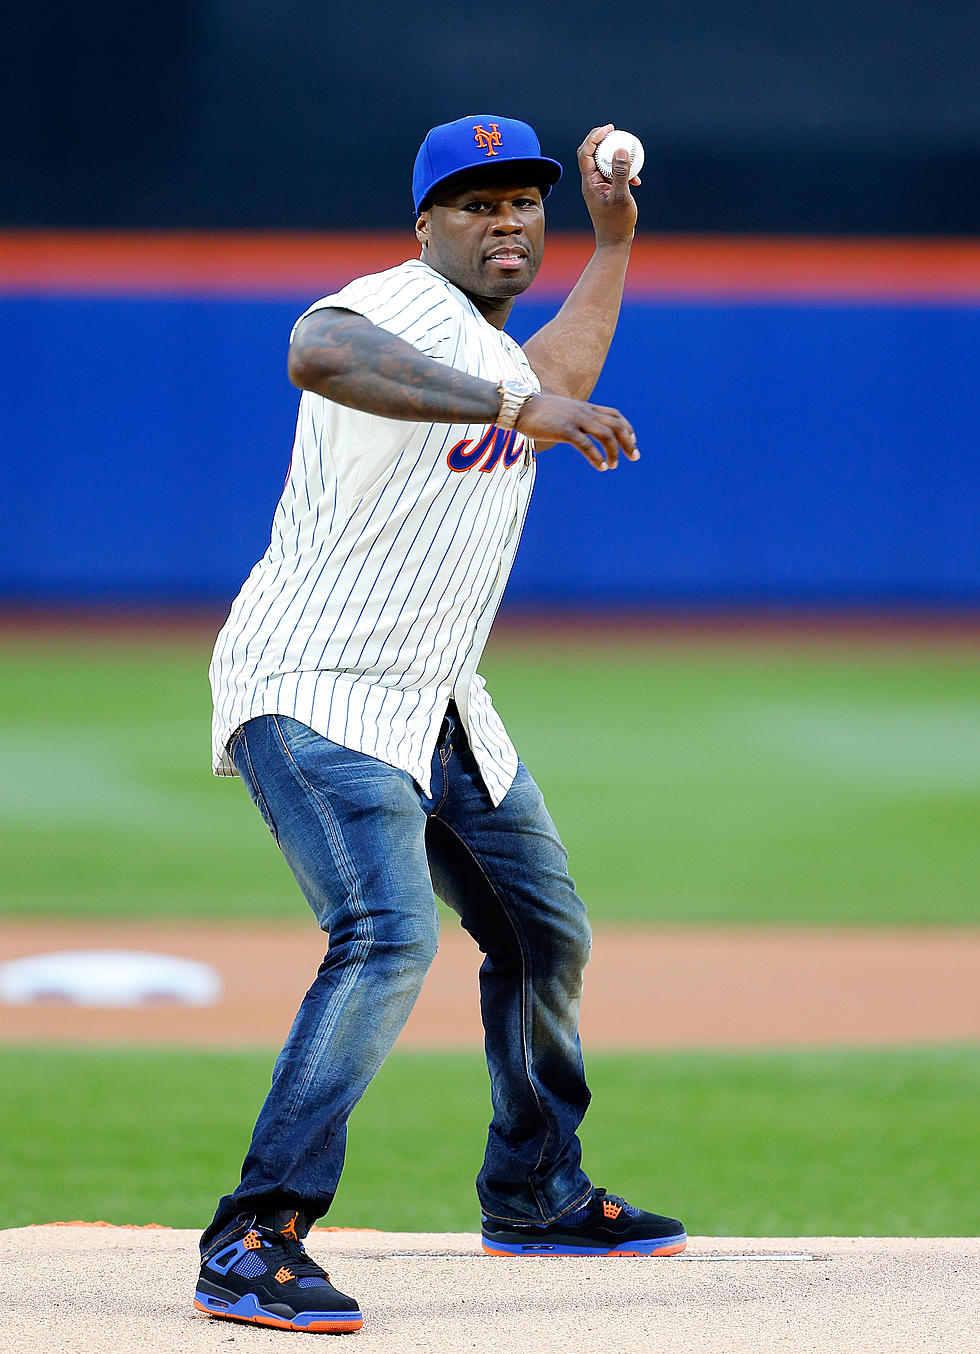 50 Cent Fails Miserably at Throwing Out the First Pitch